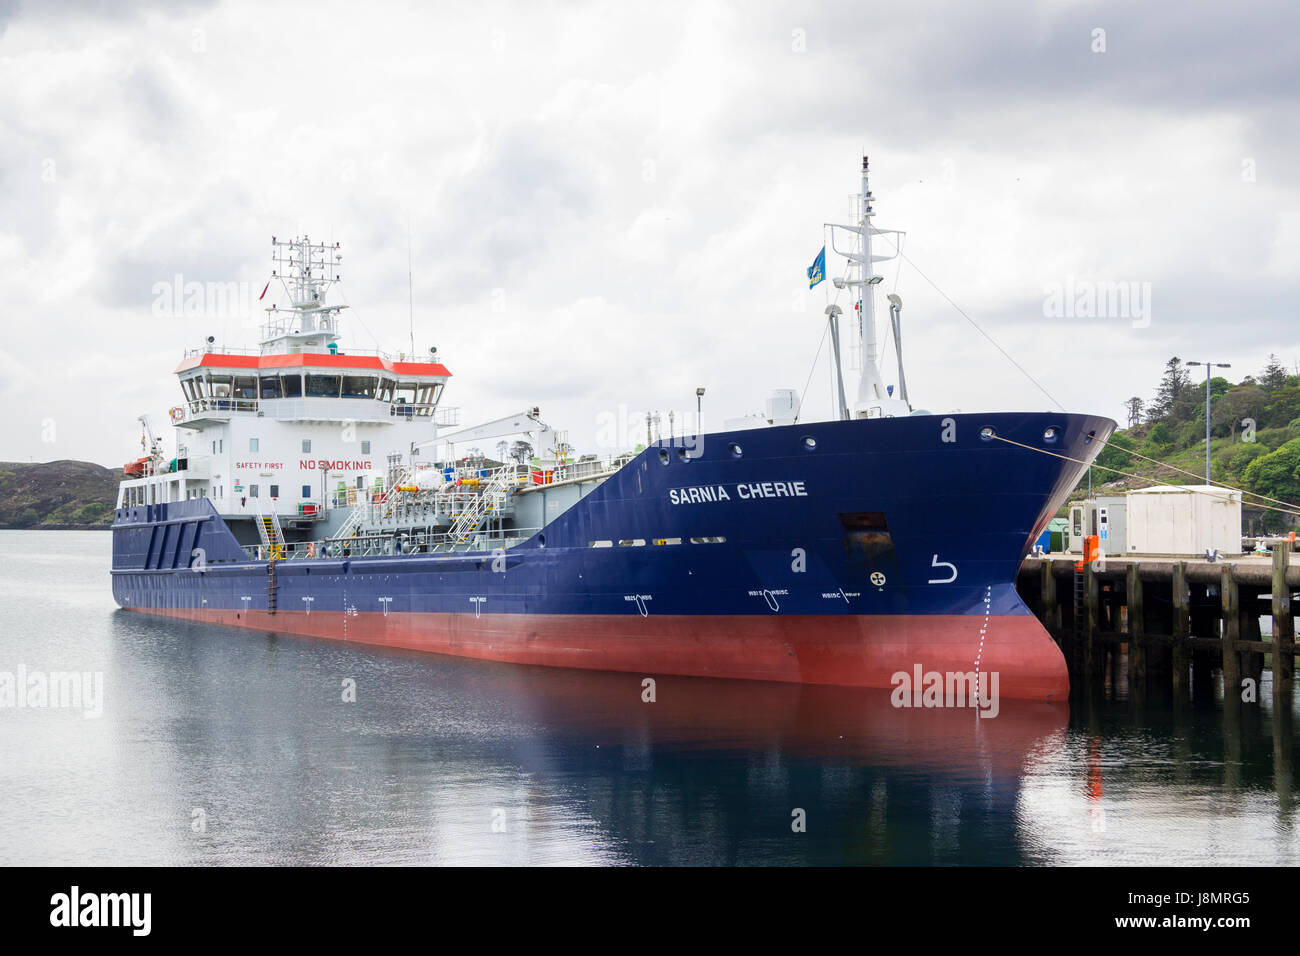 The MV Sarnia Cherie Oil Tanker docked at Stornoway, Isle of Lewis, Western Isles, Outer Hebrides, Scotland, United Kingdom Stock Photo